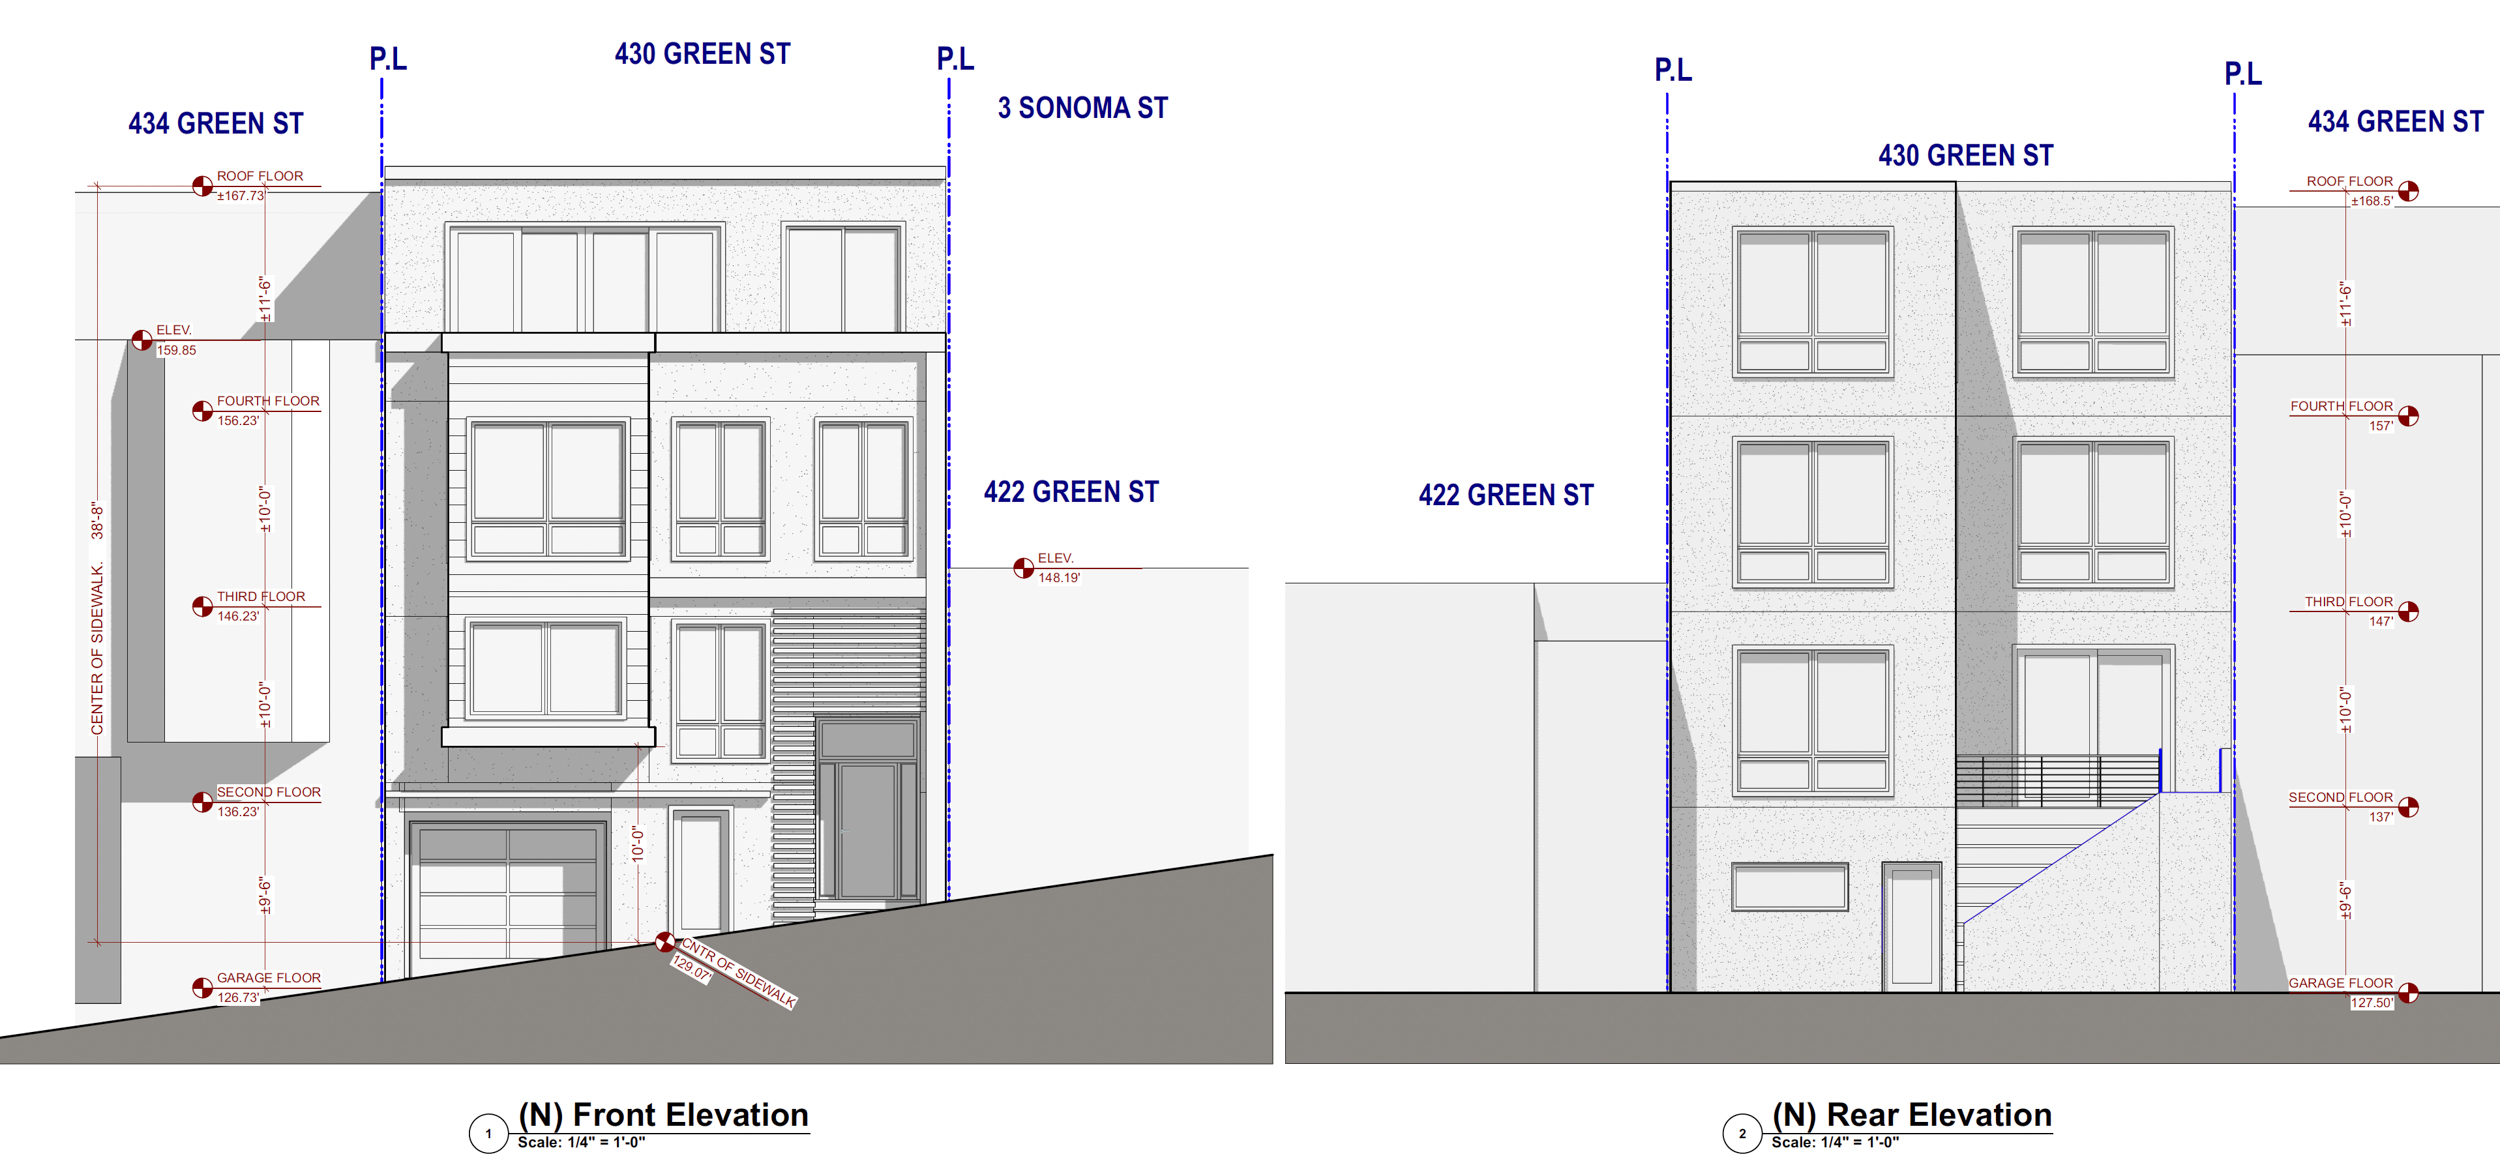 430 Green Street facade elevation, illustration by SIA Consulting